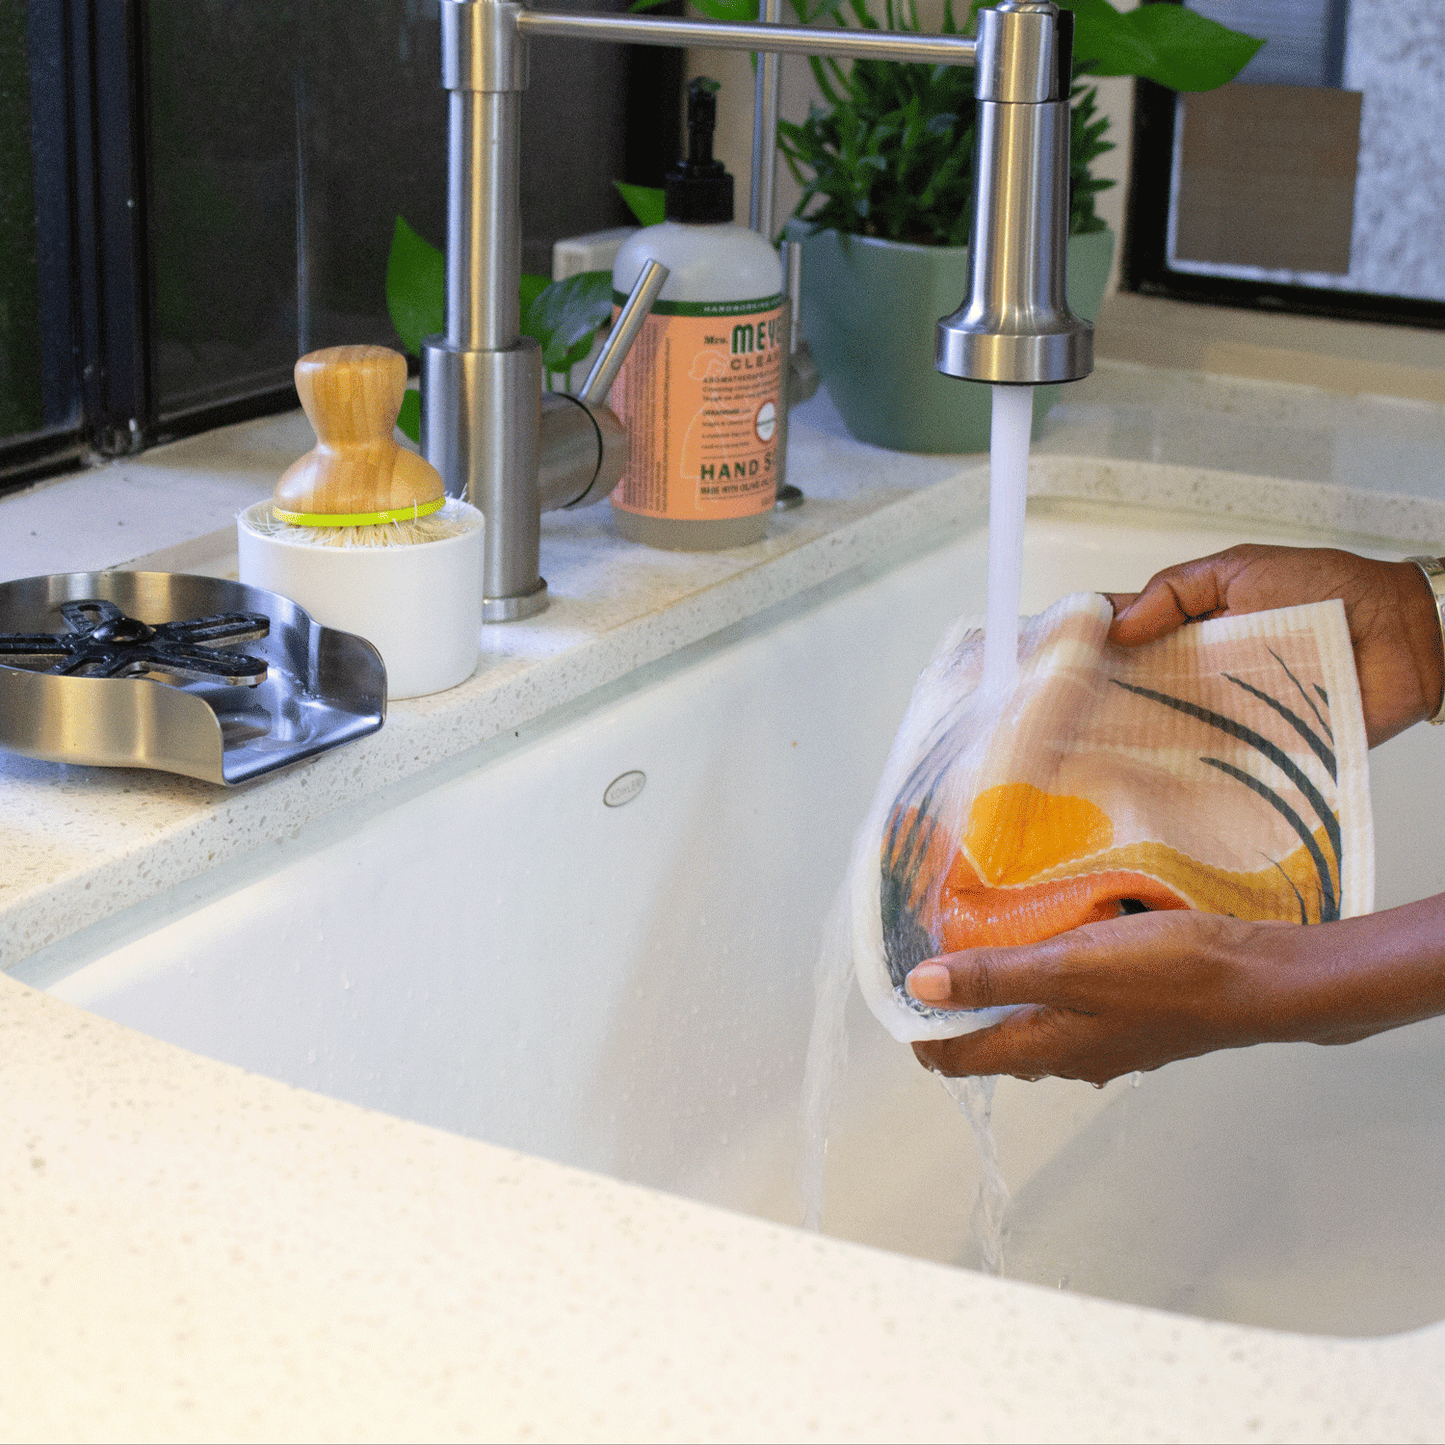 Two hands hold a Desert Oasis super cloth under a kitchen faucet. The water is falling onto the sponge cloth, and you can see that the sponge cloth is bending in soft folds. The bright desert scene, of a sun, hills, and plants; printed on the cloth is visible. There are plants, soap, and other kitchen items in the background.